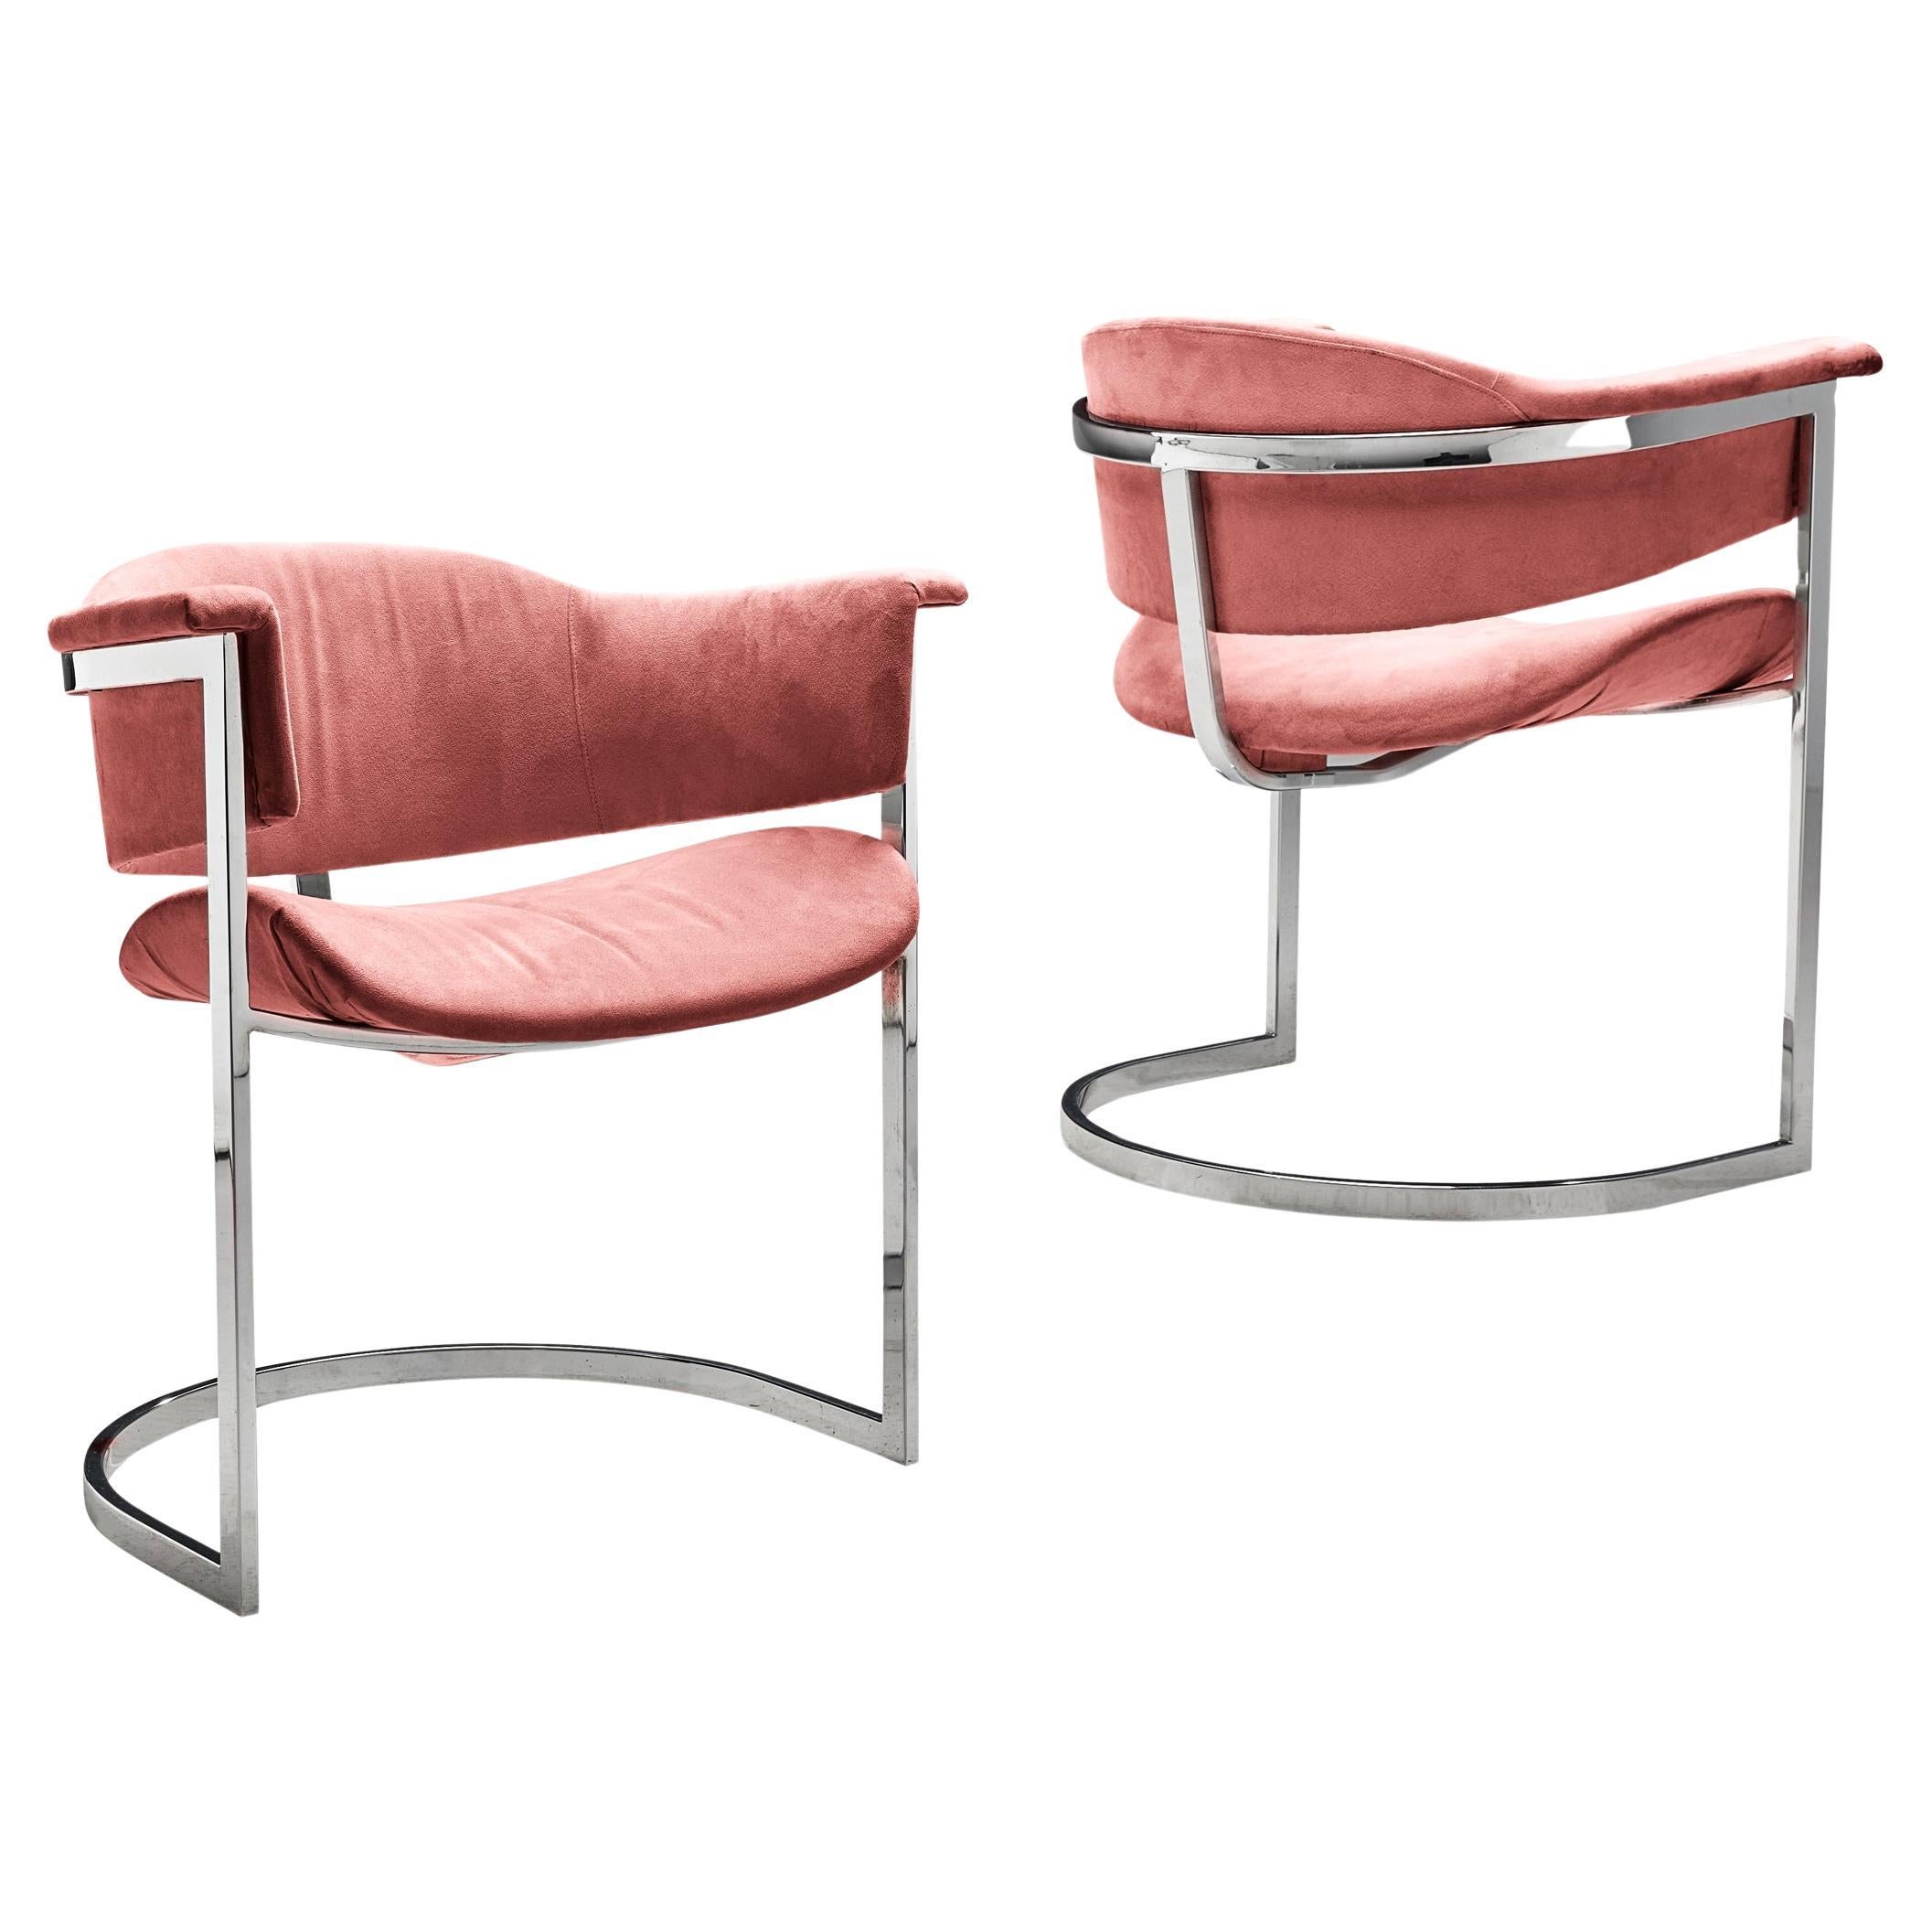 Vittorio Introini Dining Room Chairs